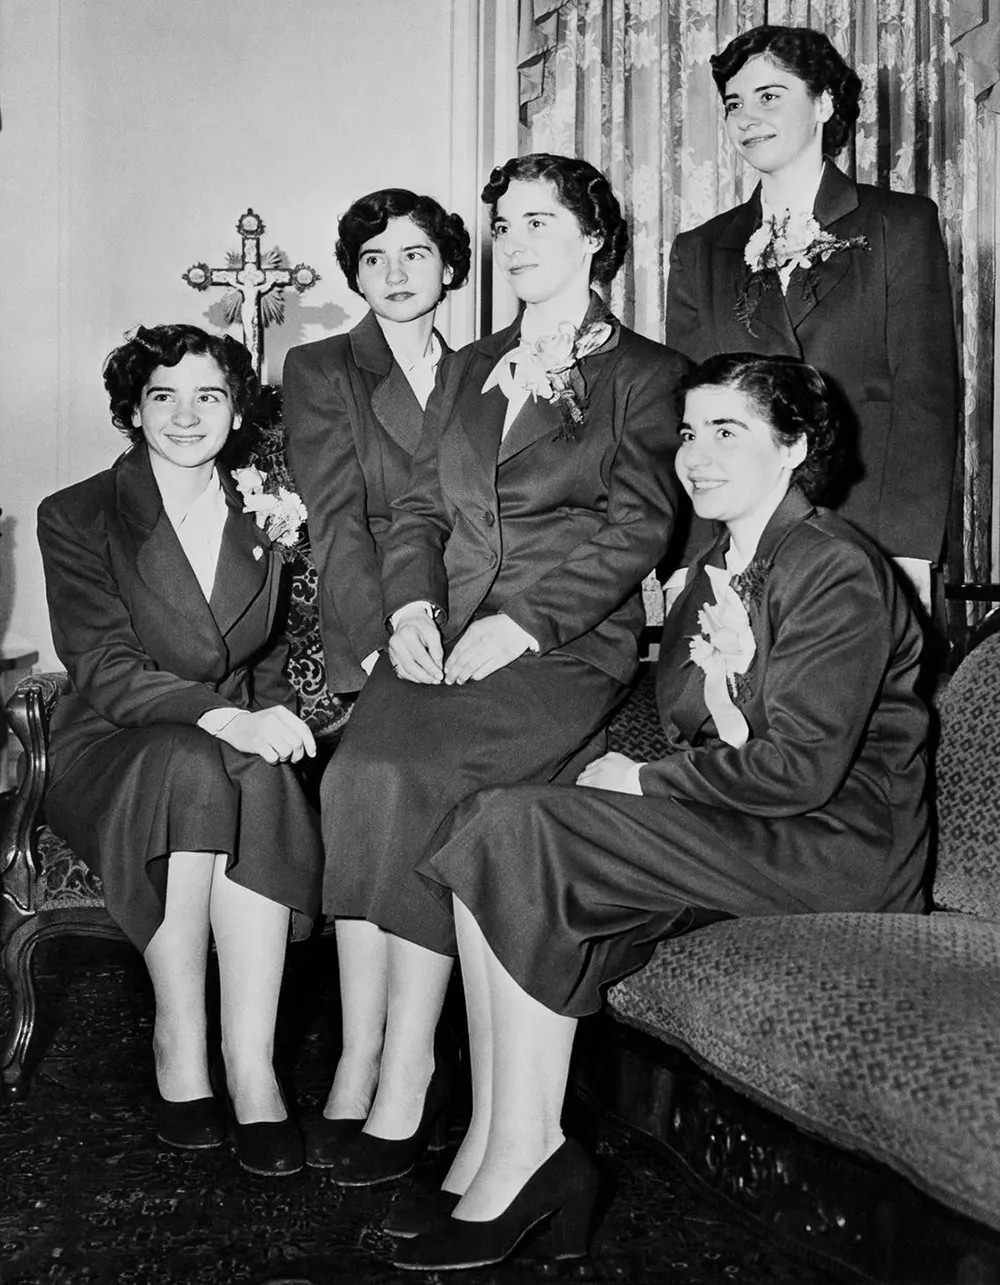 Yvonne, Annette, Marie, Cecile, and Emilie visit St. Paul, Minnesota for the winter carnival, 1950.